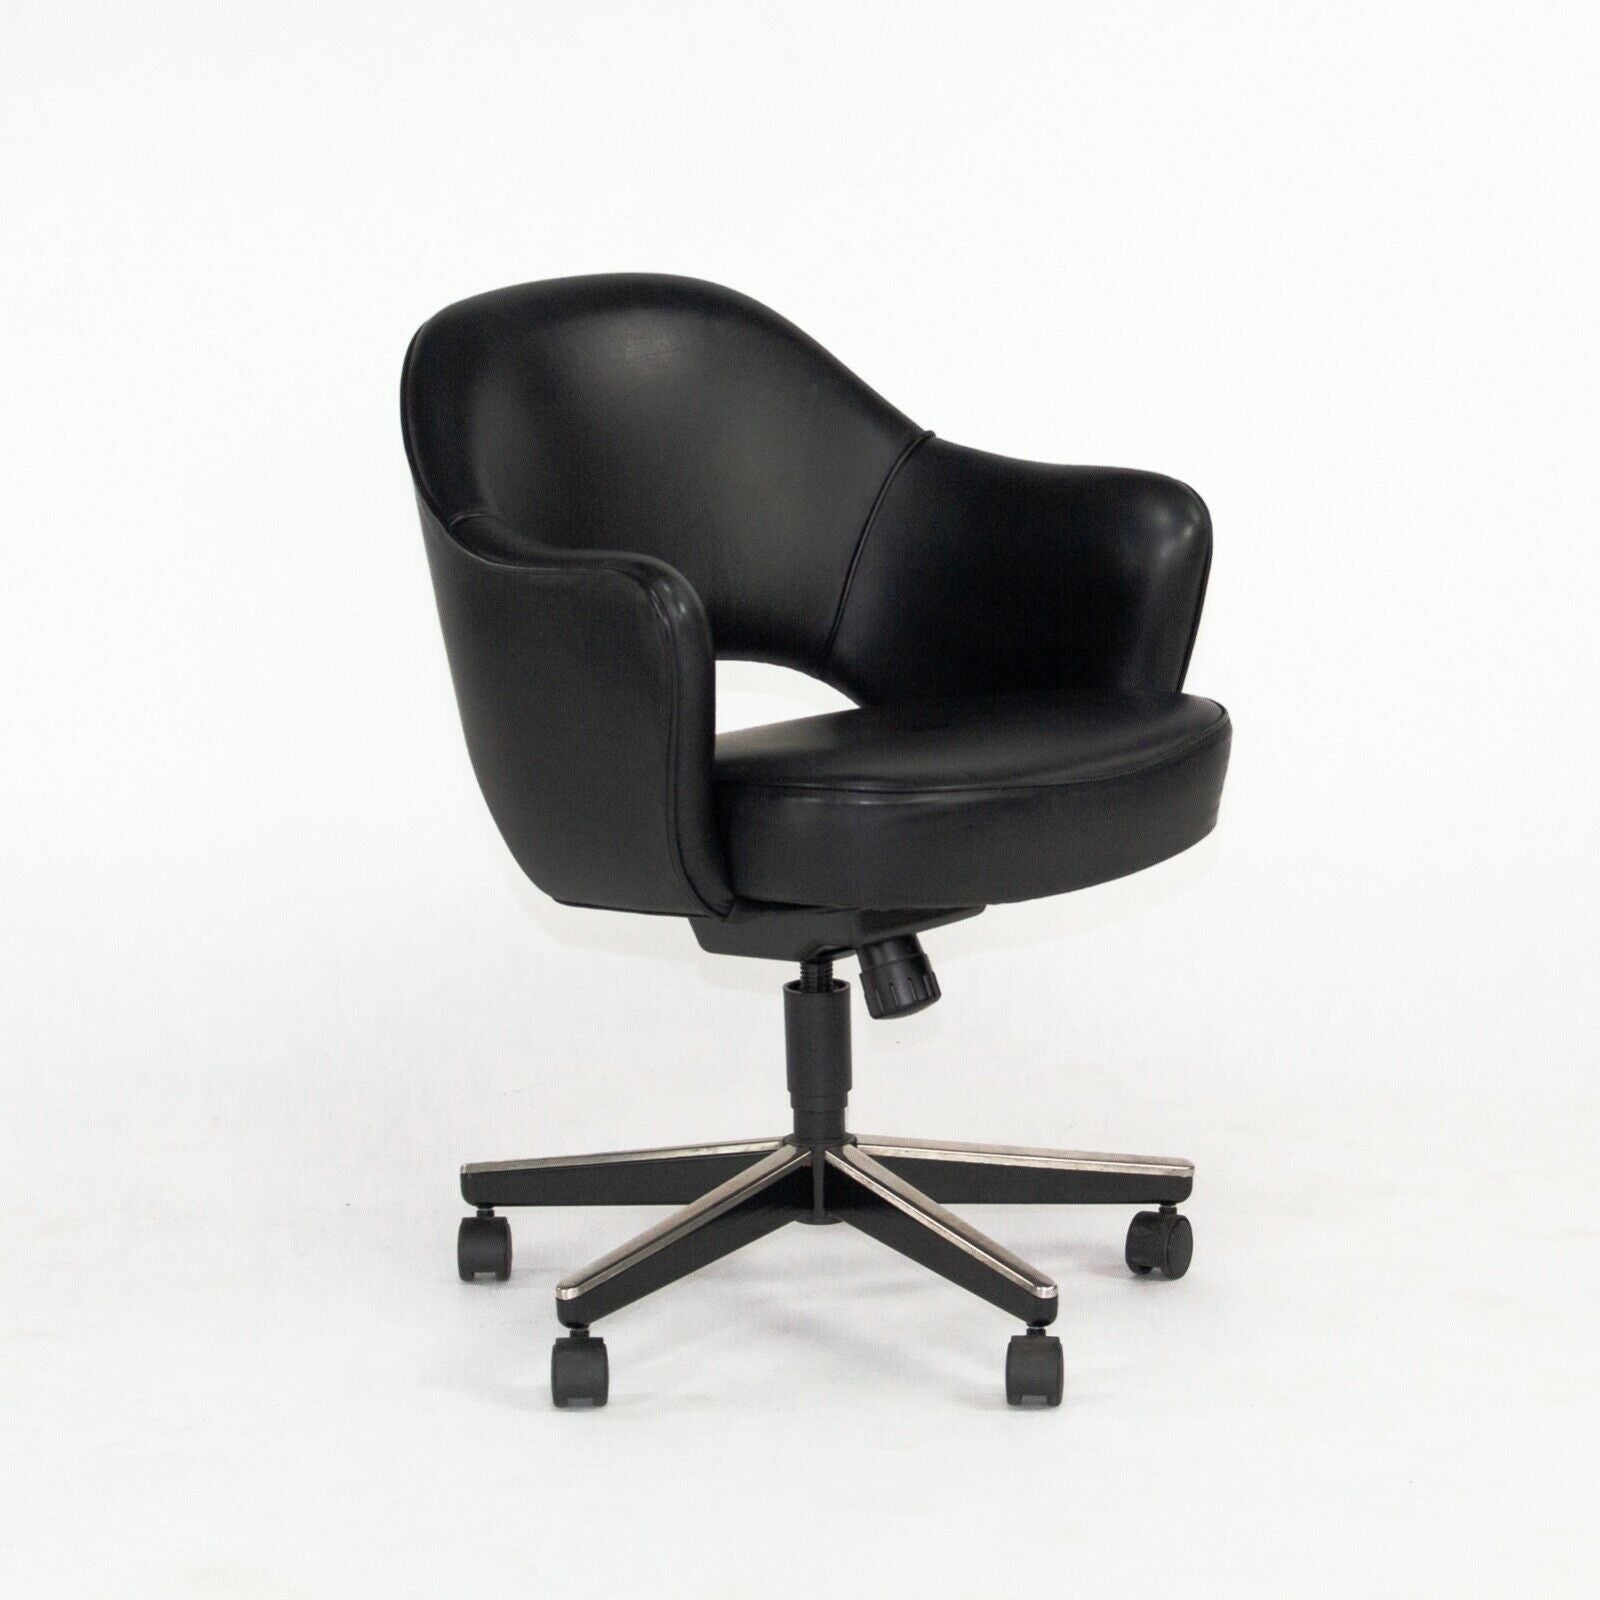 2011 Eero Saarinen for Knoll Executive Desk Chair w/ Rolling Base Black Leather